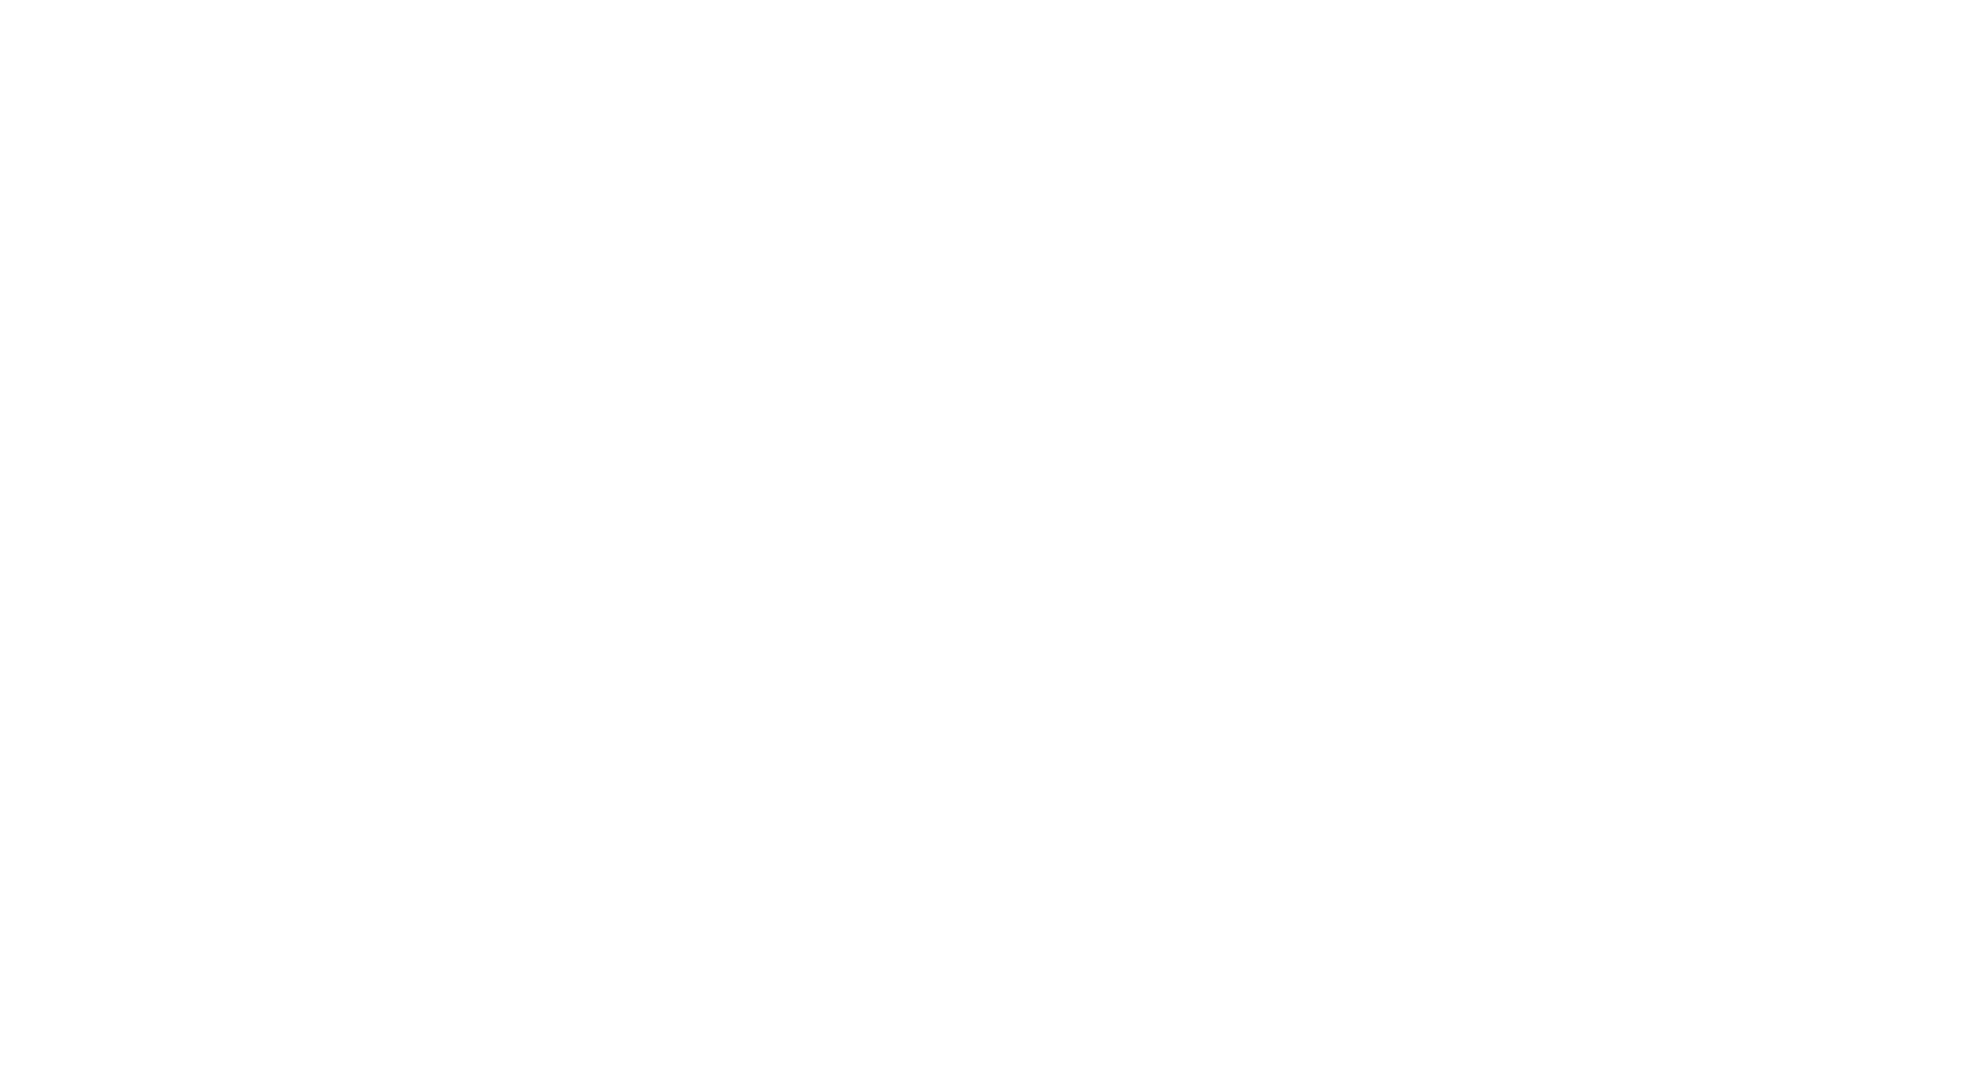 An initiative of the Pro-Life Generation